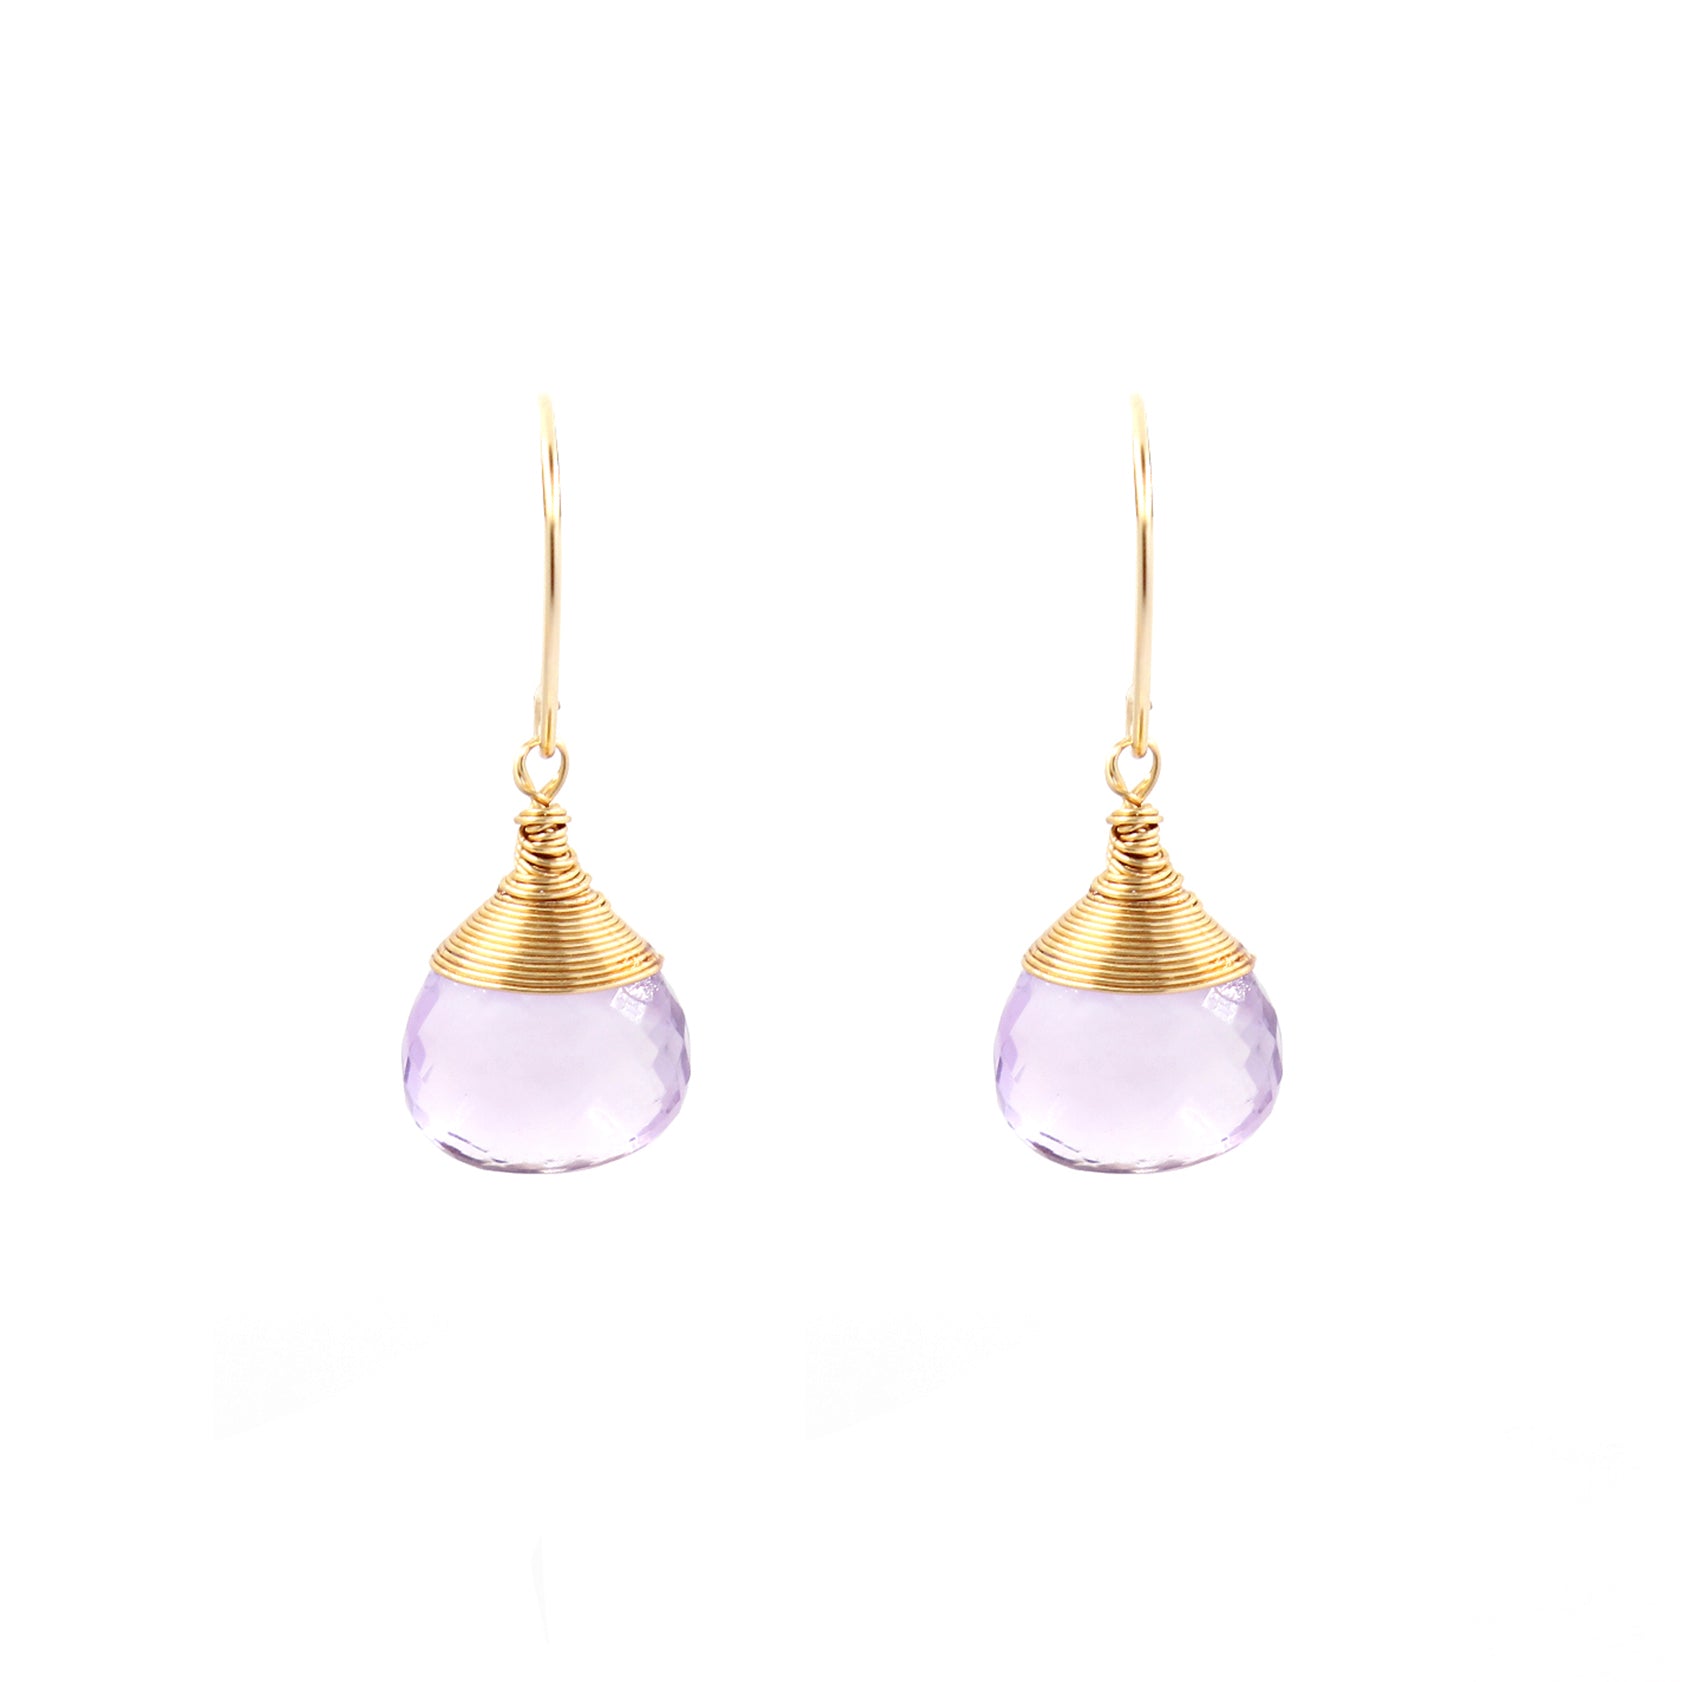 Make a Statement with 'Donna' Gemstone Drop Earrings by Gosia Orlowska